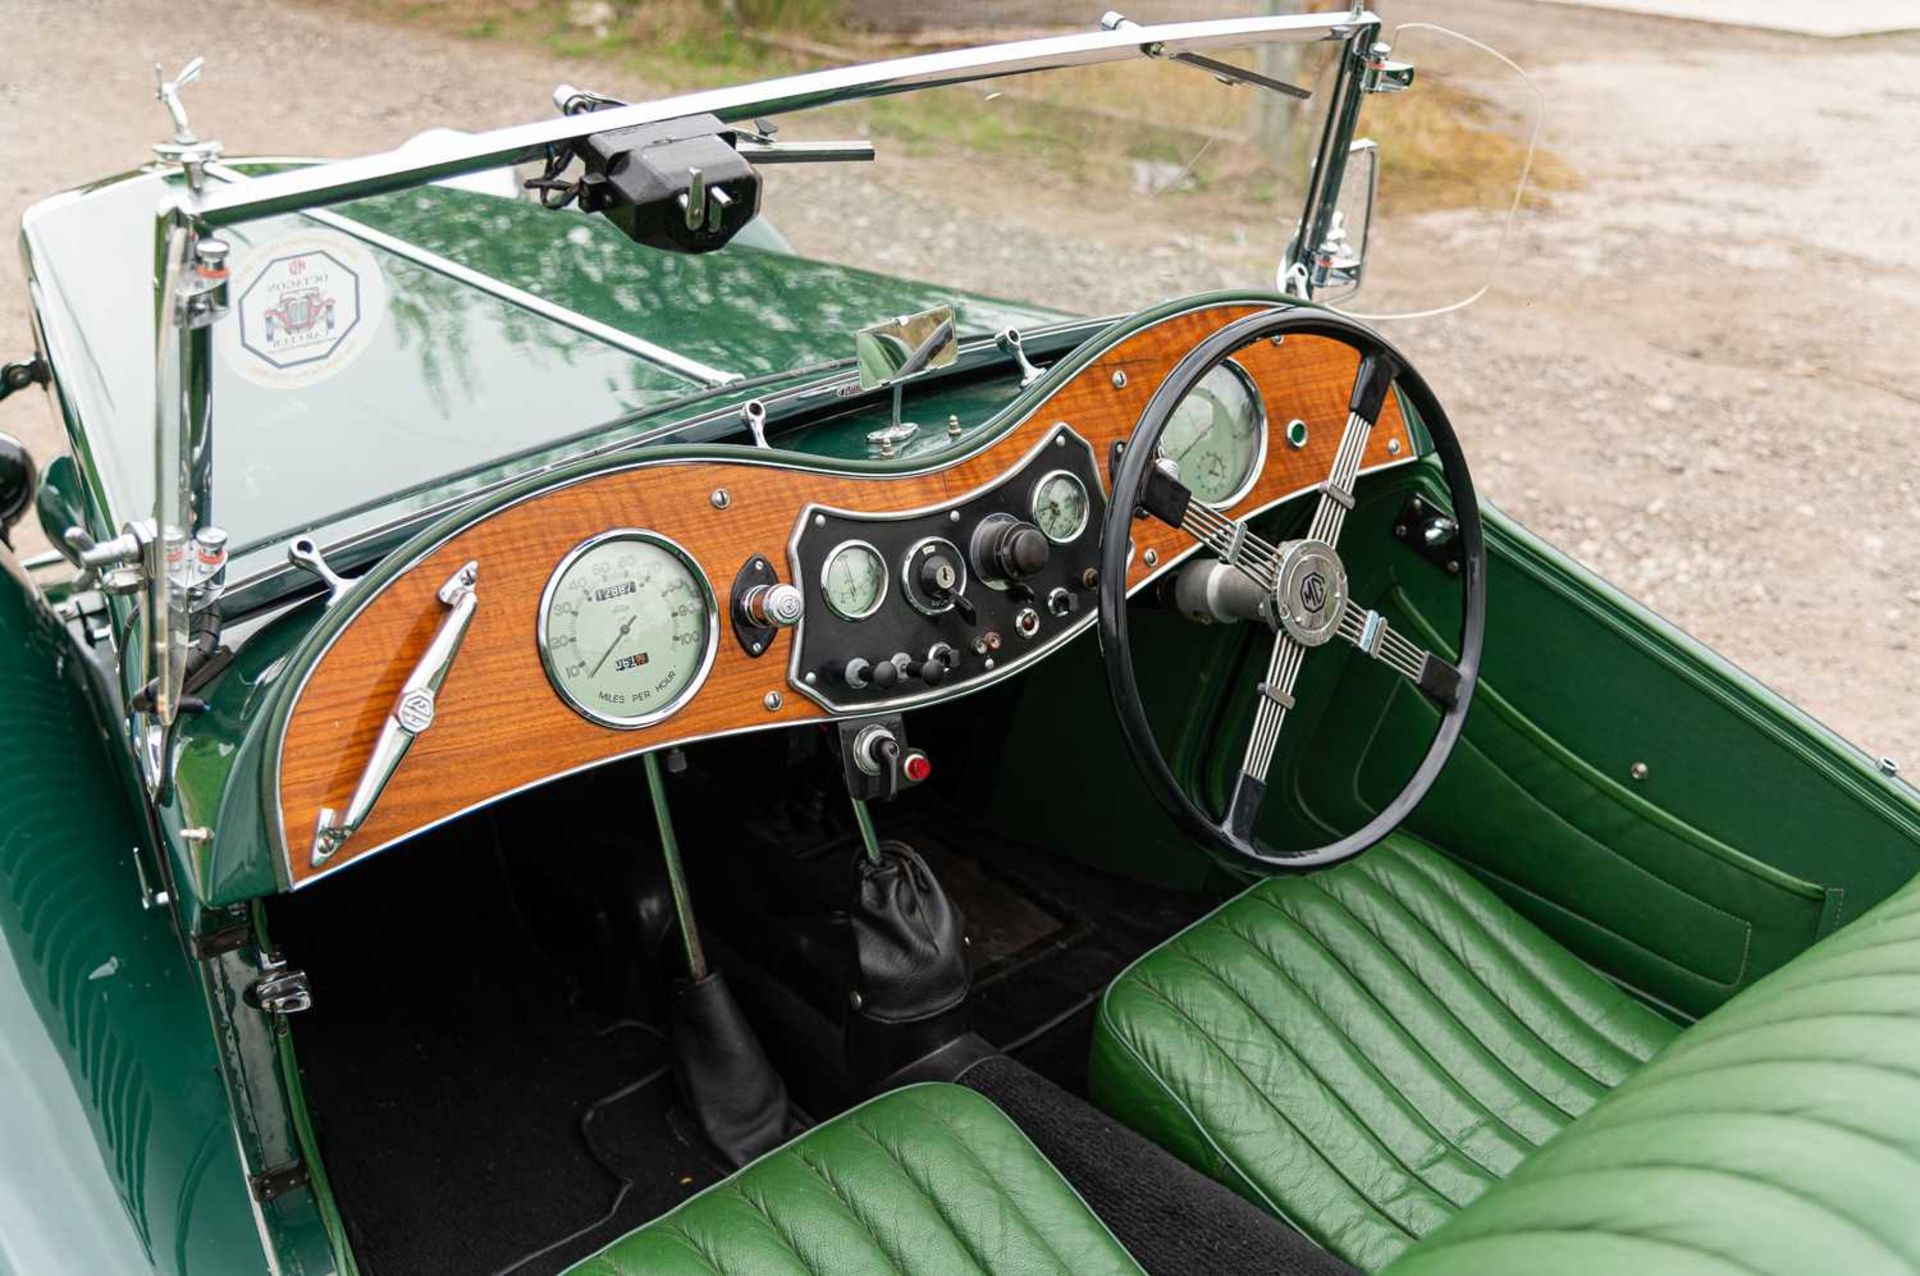 1947 MG TC Midget  Fully restored, right-hand-drive UK home market example - Image 52 of 76